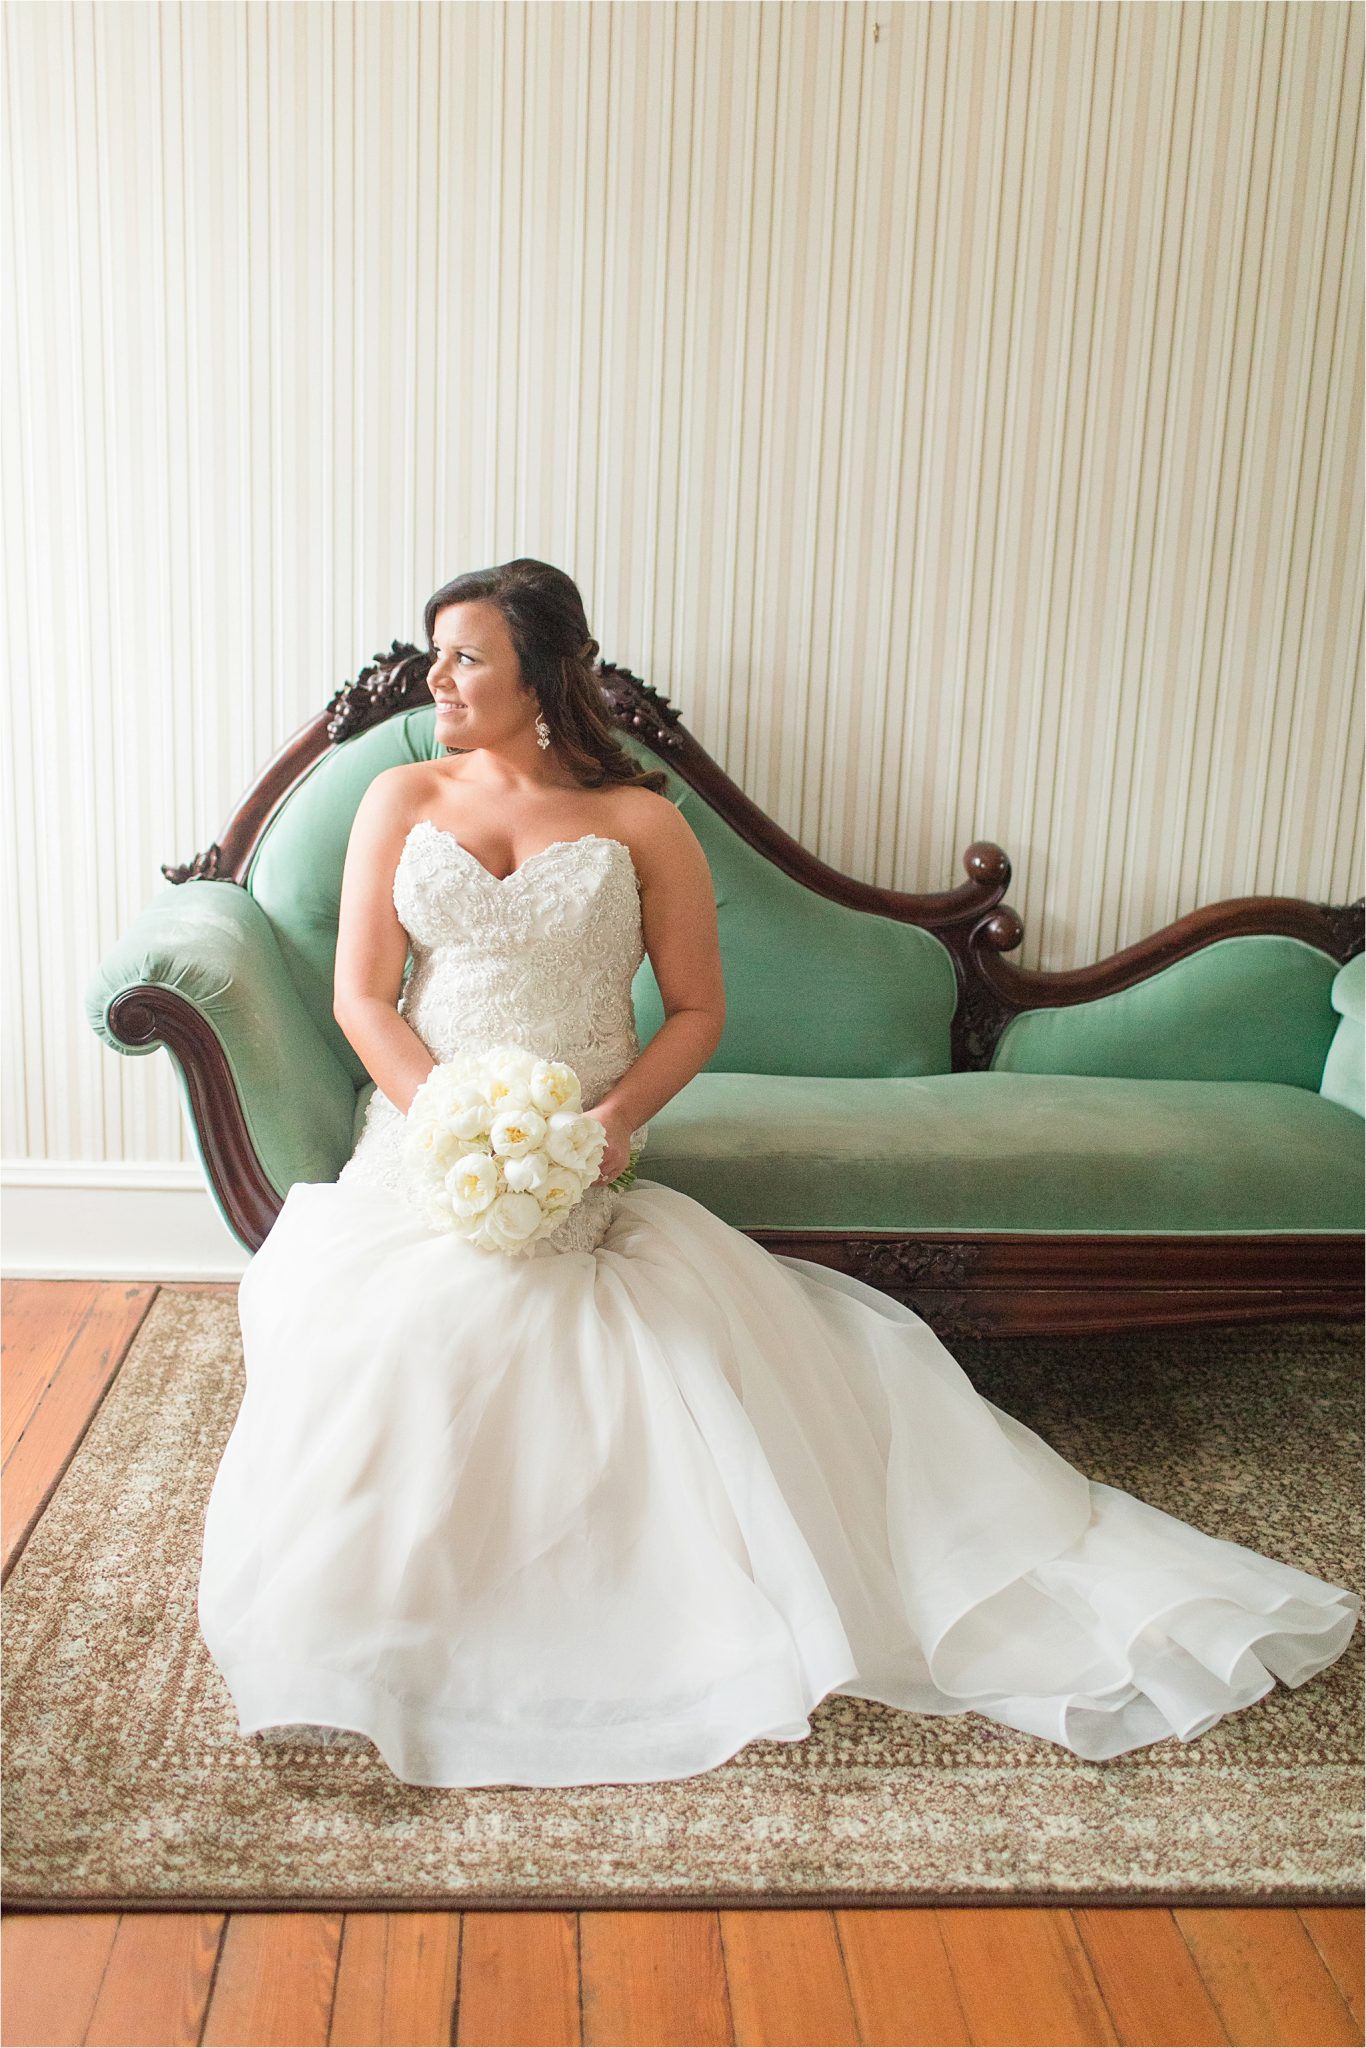 bride on antique couch-antique teal couch-mermaid style wedding dress-strapless